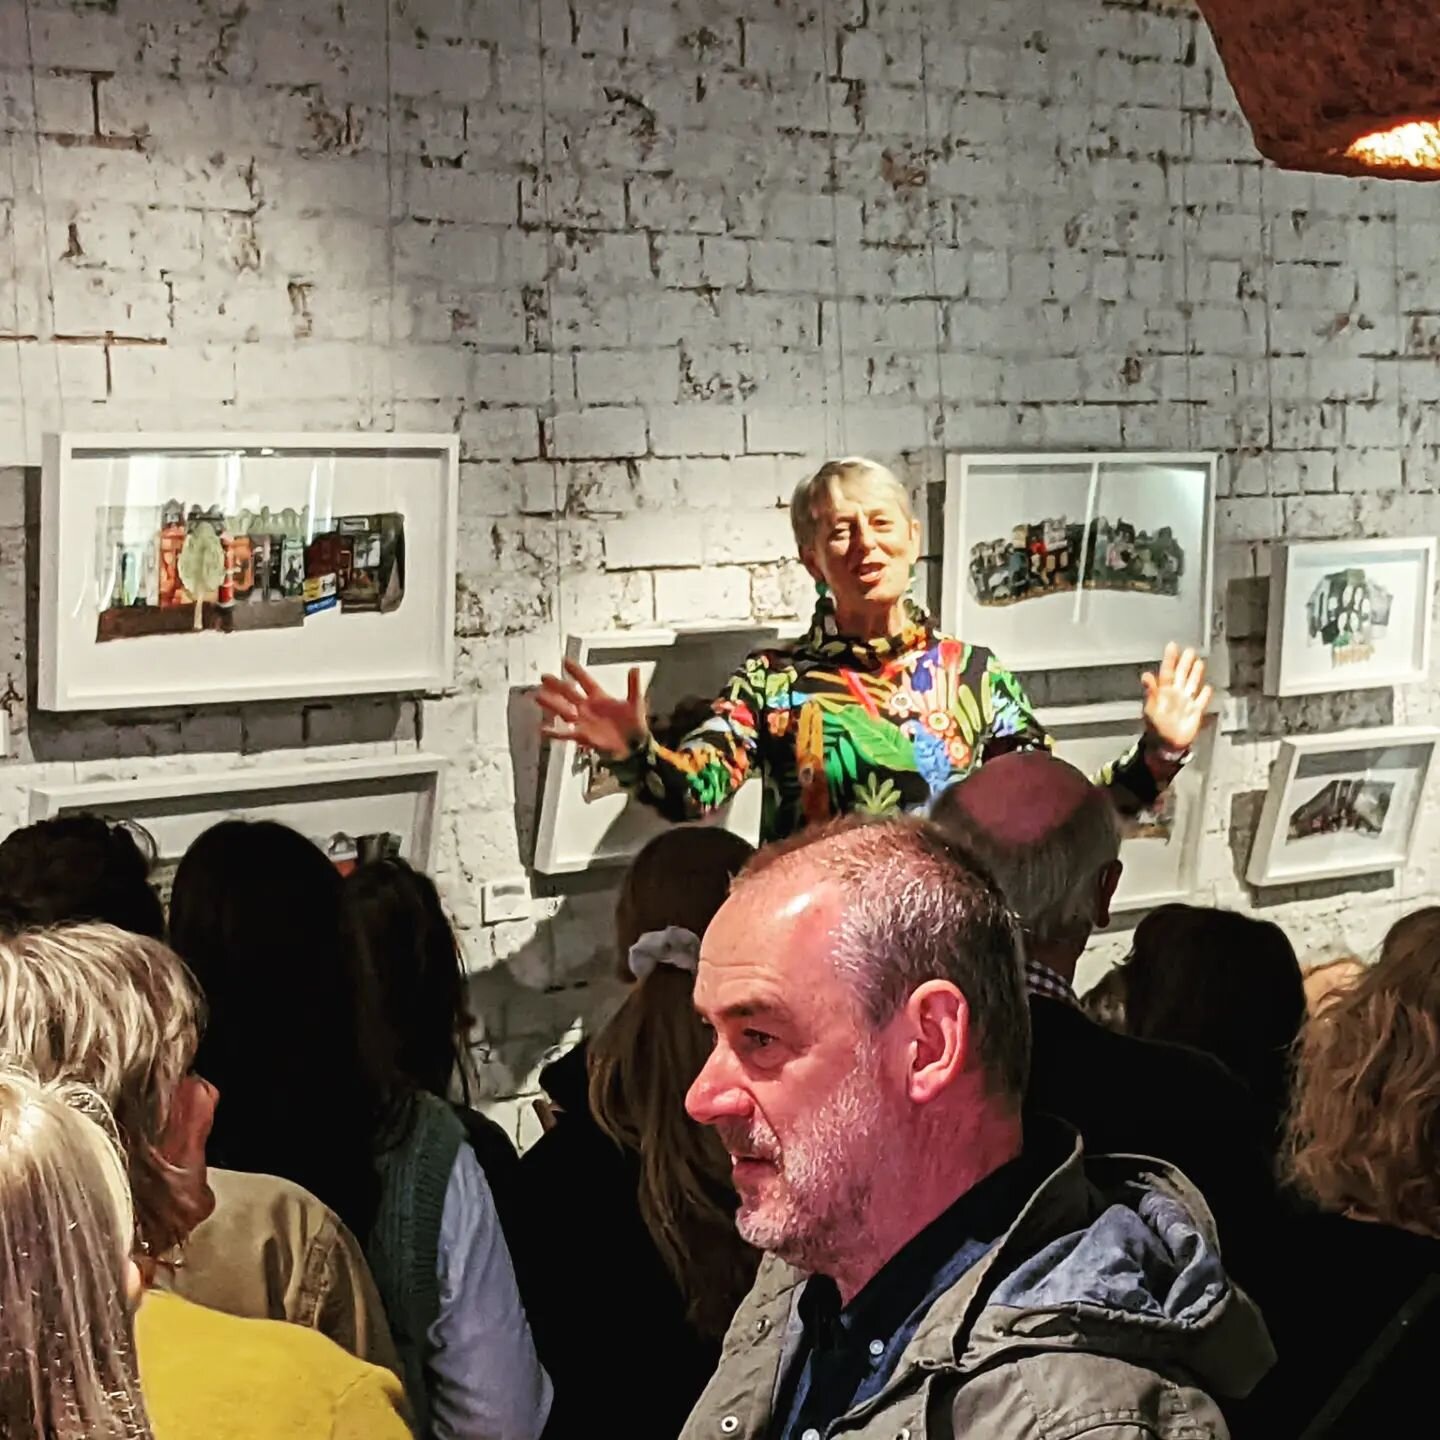 Well what a night it was for the opening of @sallydarlisonartist  art exhibition at @littlelocal_dc !! It was lovely to see so many turnout for the event...even a sudden hail storm didn't stop the crowd from adoring and purchasing most of the artwork